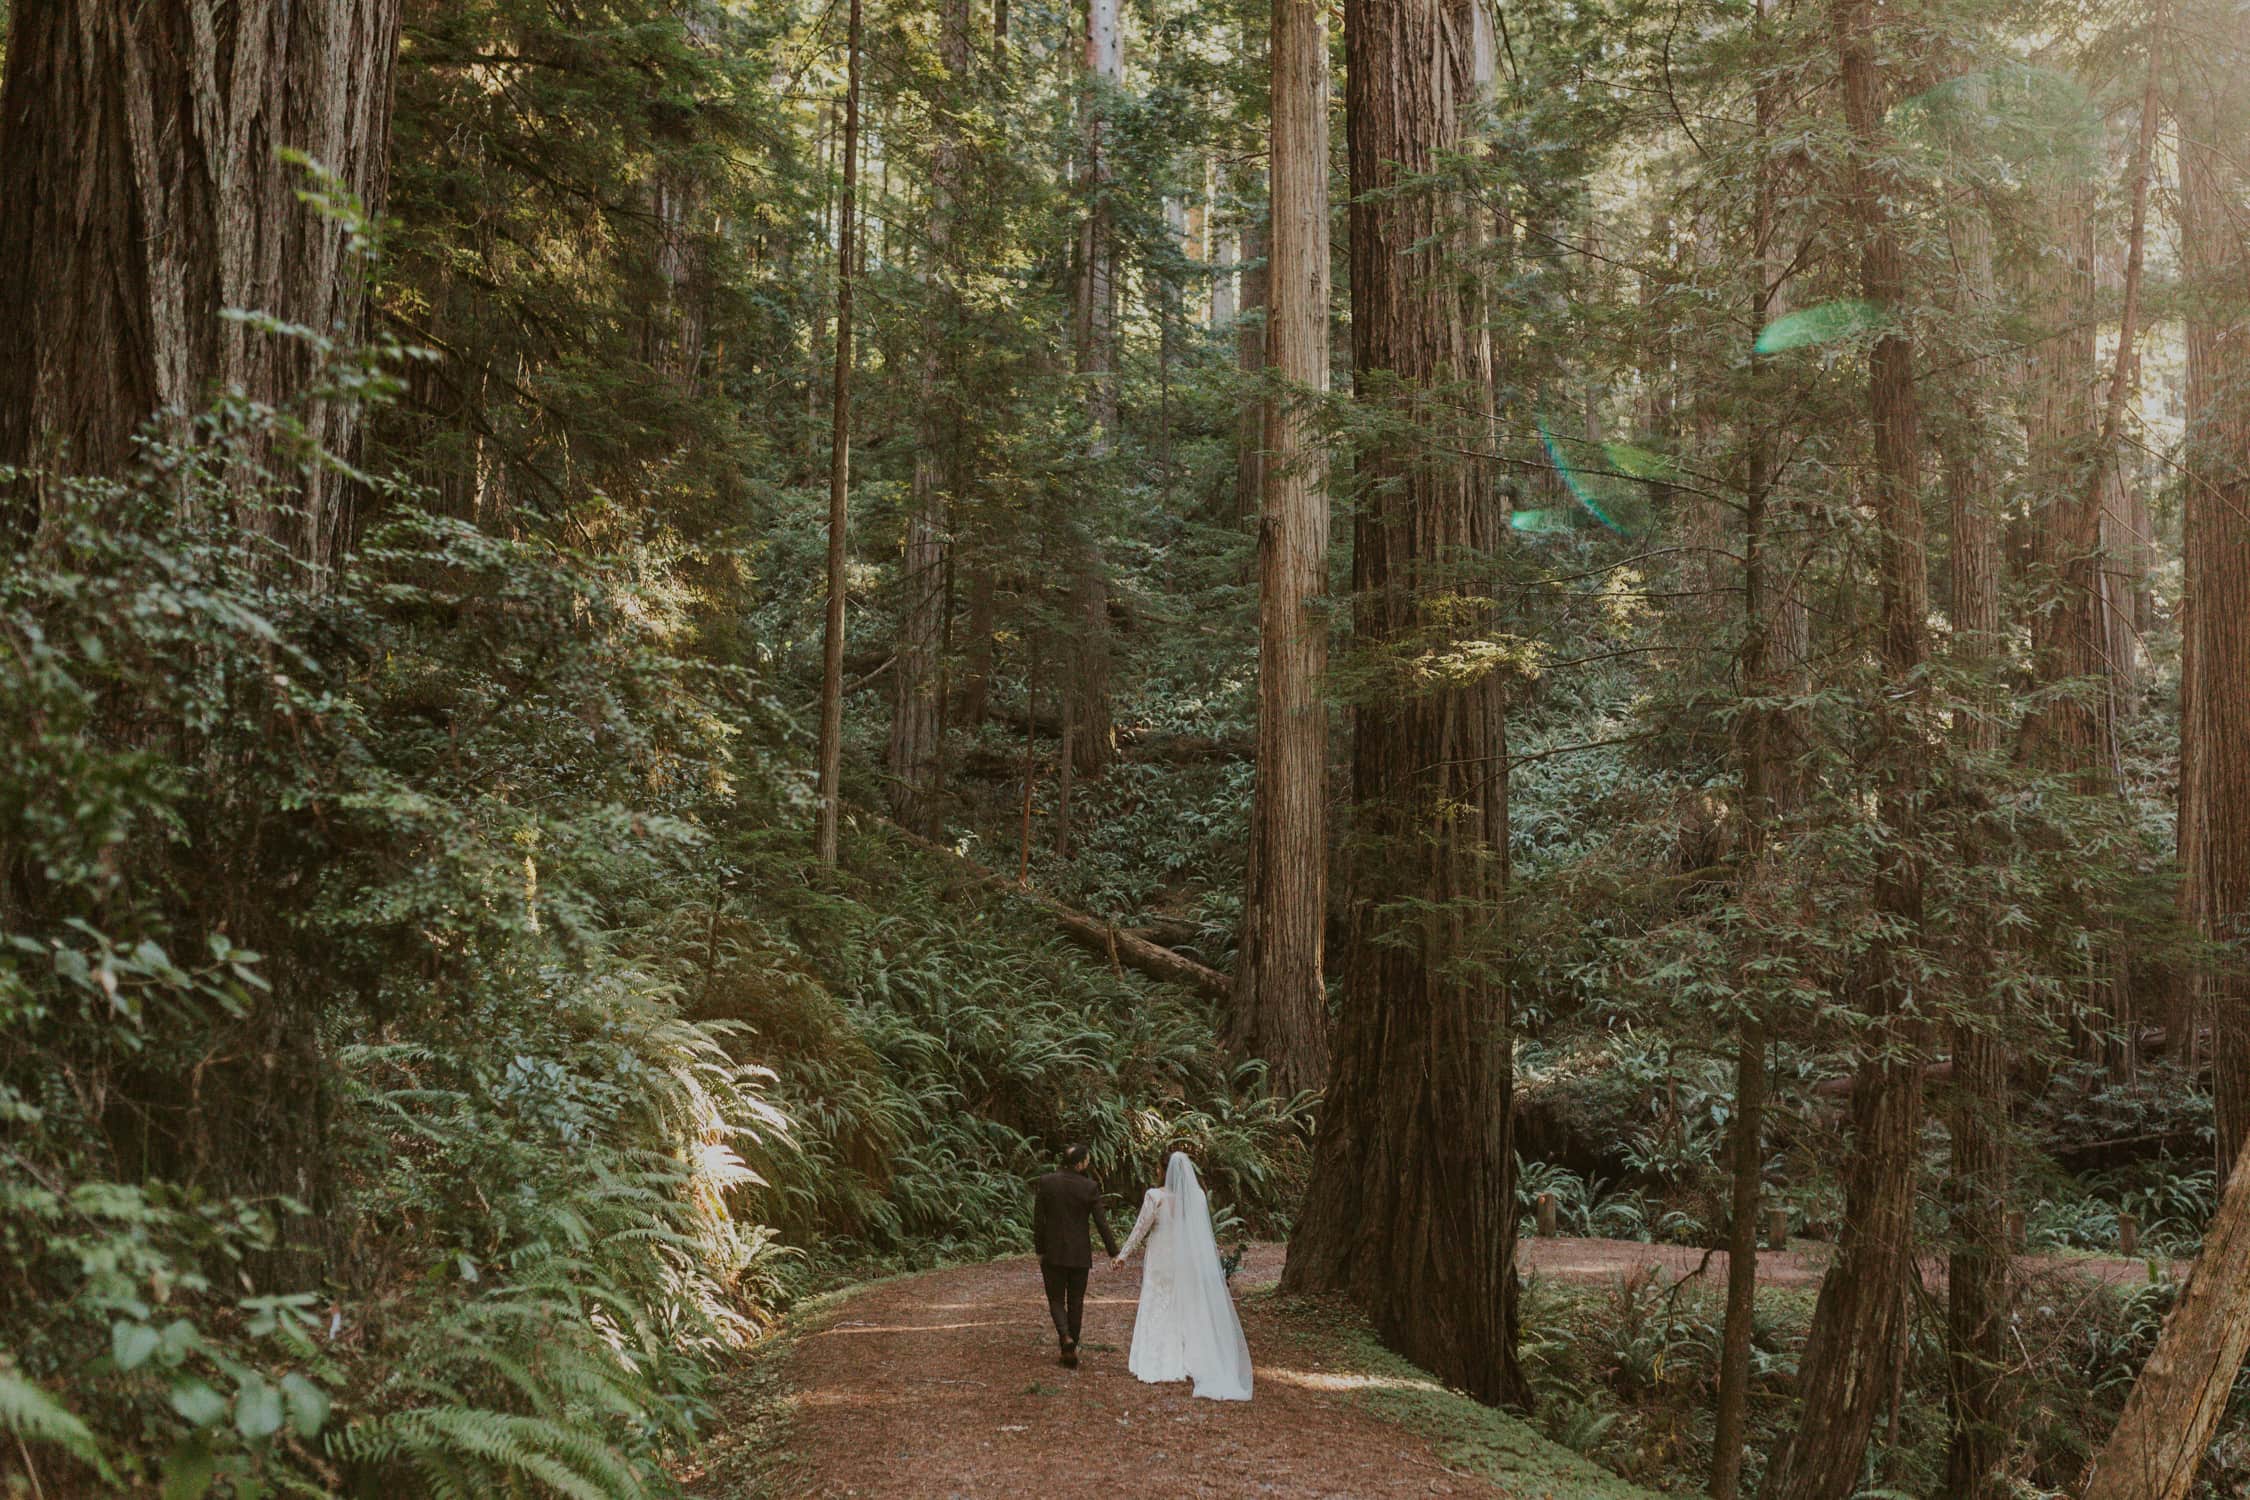 A couple holding hands and walking through the forest in Redwood National Park.